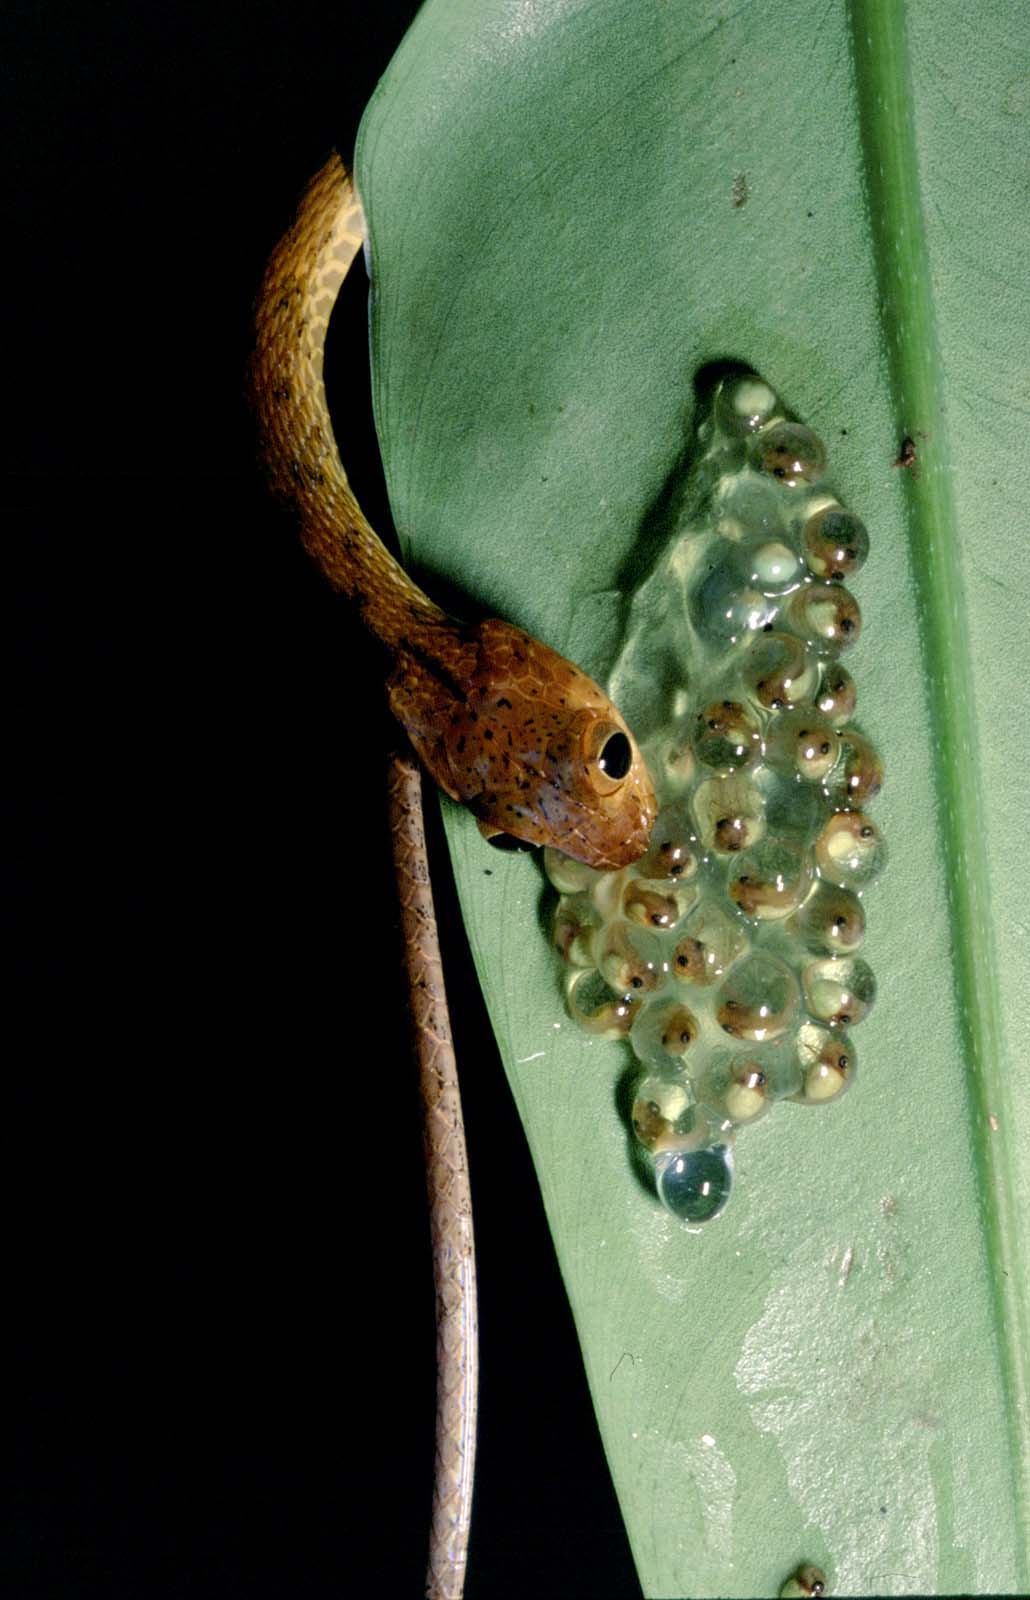 Frogs and their eggs are an important source of nutrition for many snakes. This tiny blunt-headed tree snake (Imantodes) snags a meal from of frog eggs in the Panamanian forest. Photo Credit: Karen Warkentin. Click image to download hi-res version.
